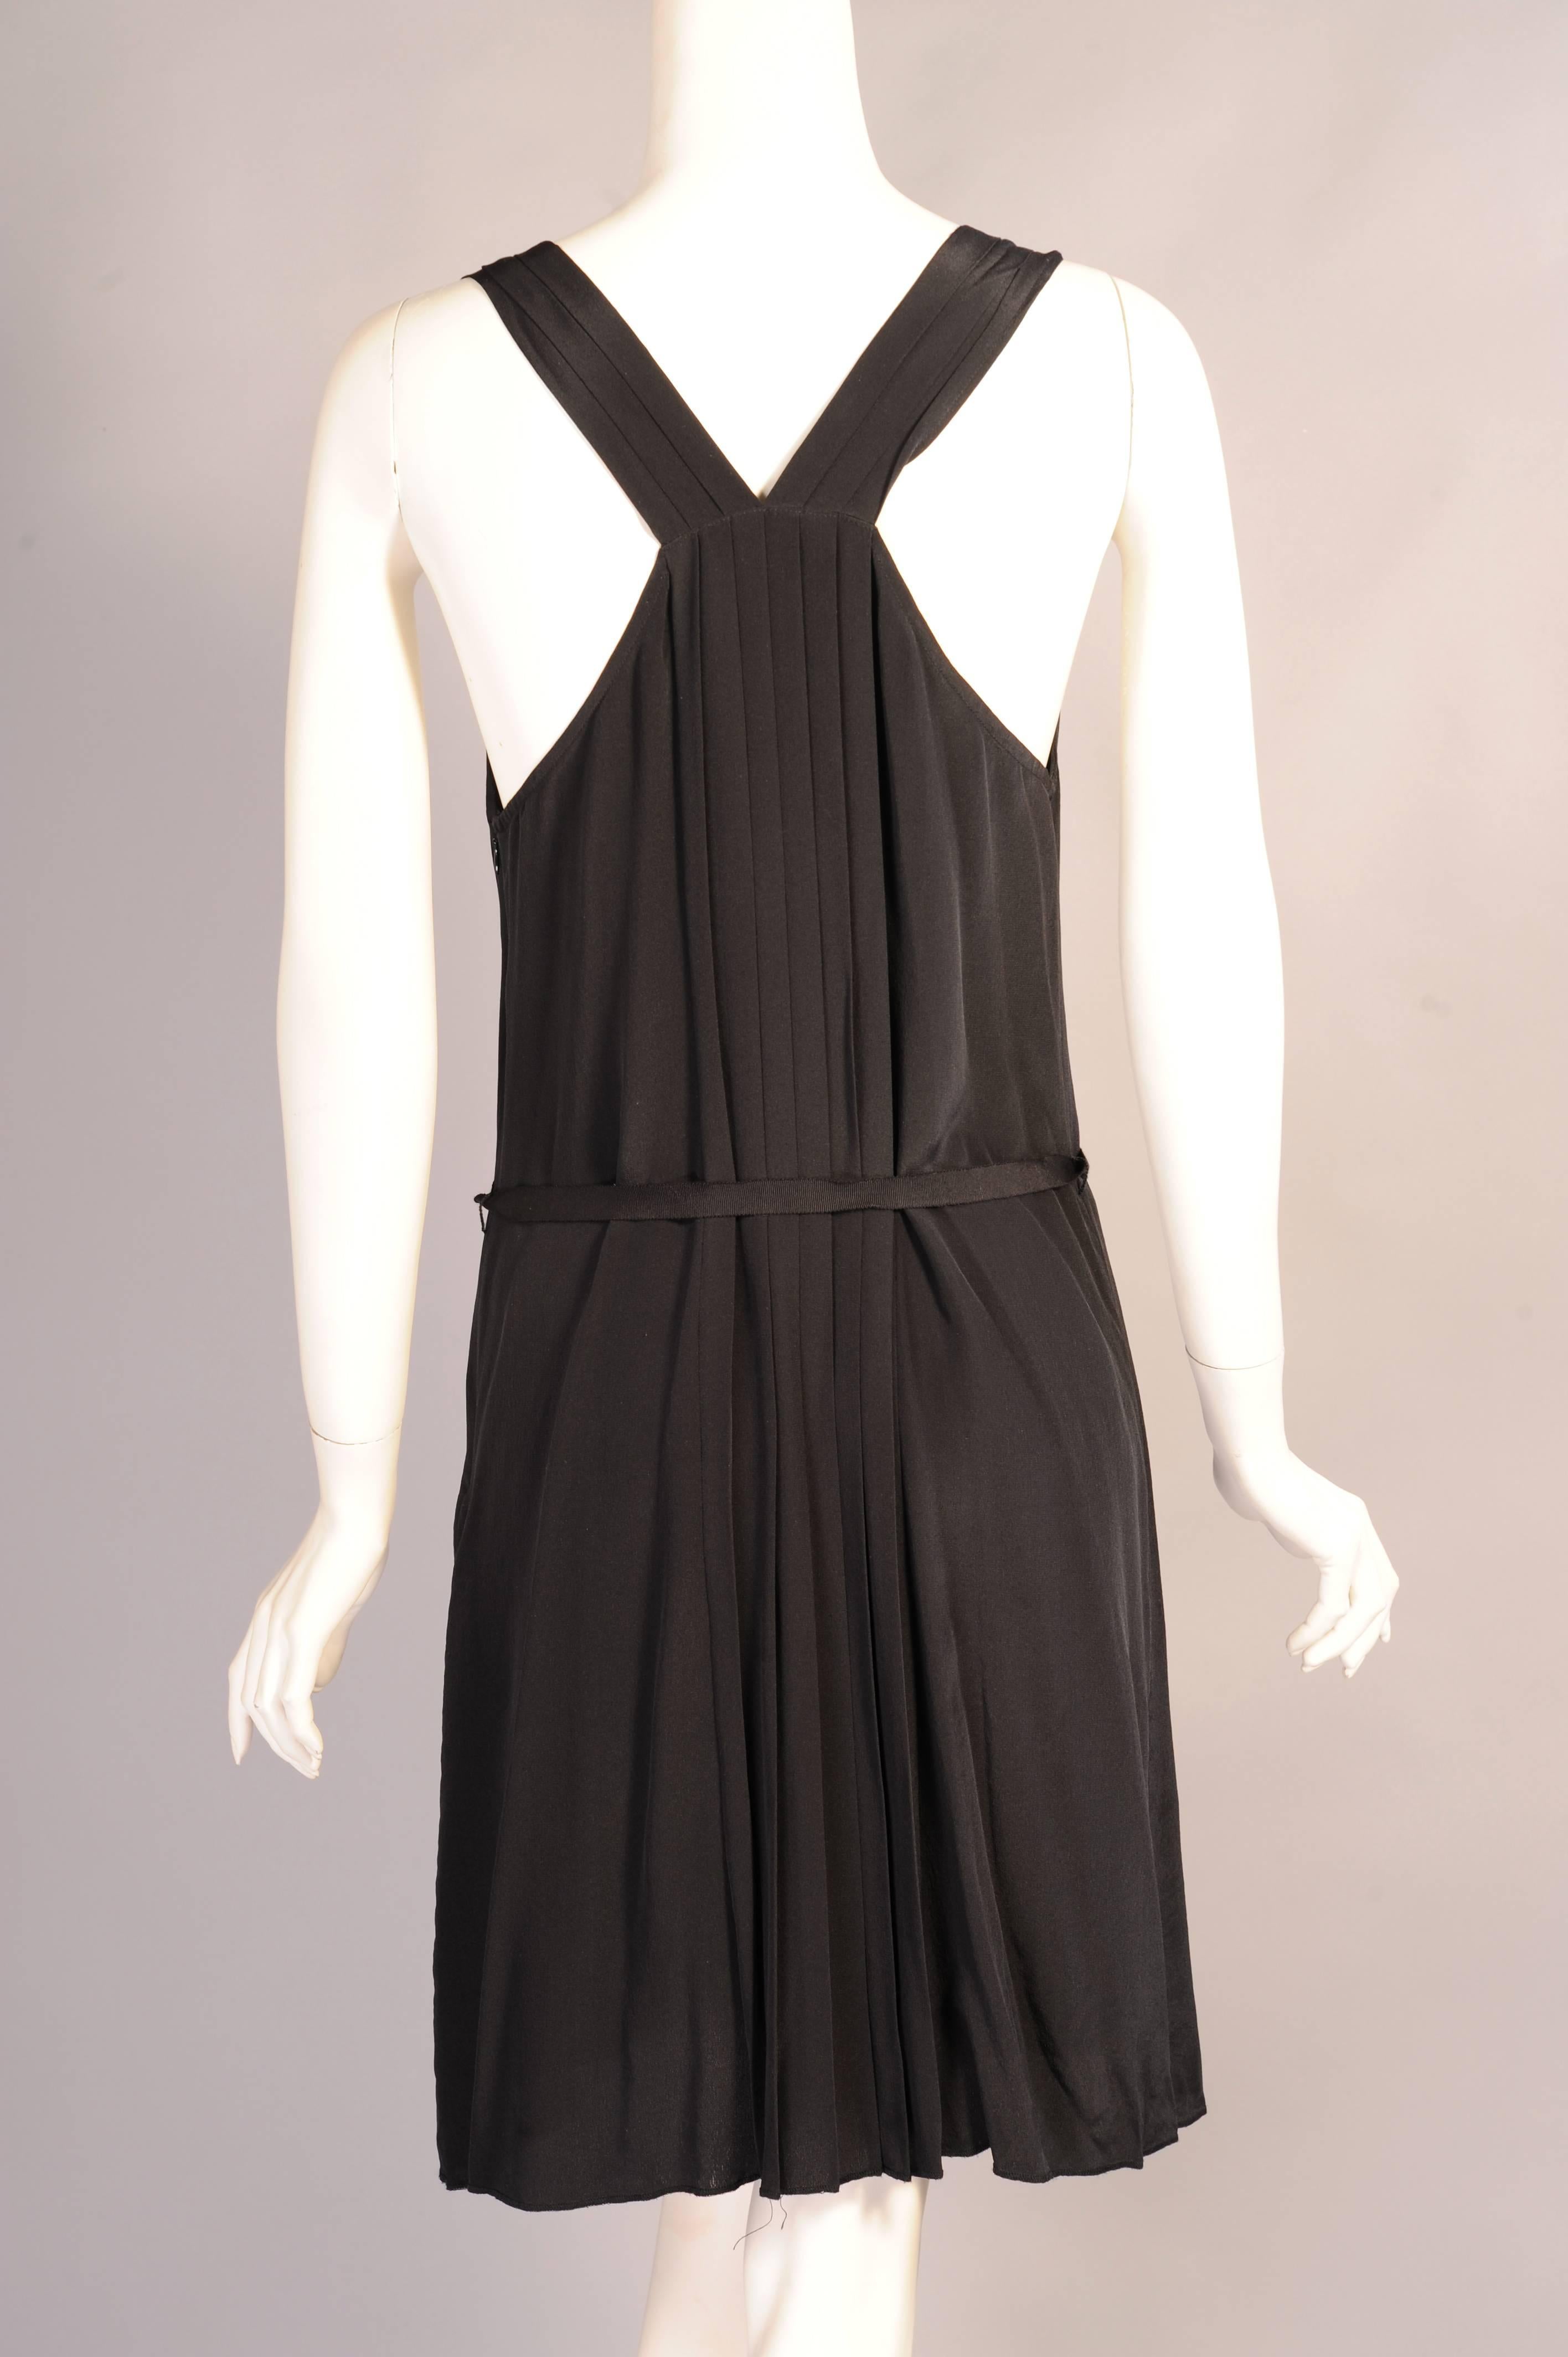 Sonia Rykiel Low Cut Black Silk Dress, Never Worn In New Condition For Sale In New Hope, PA